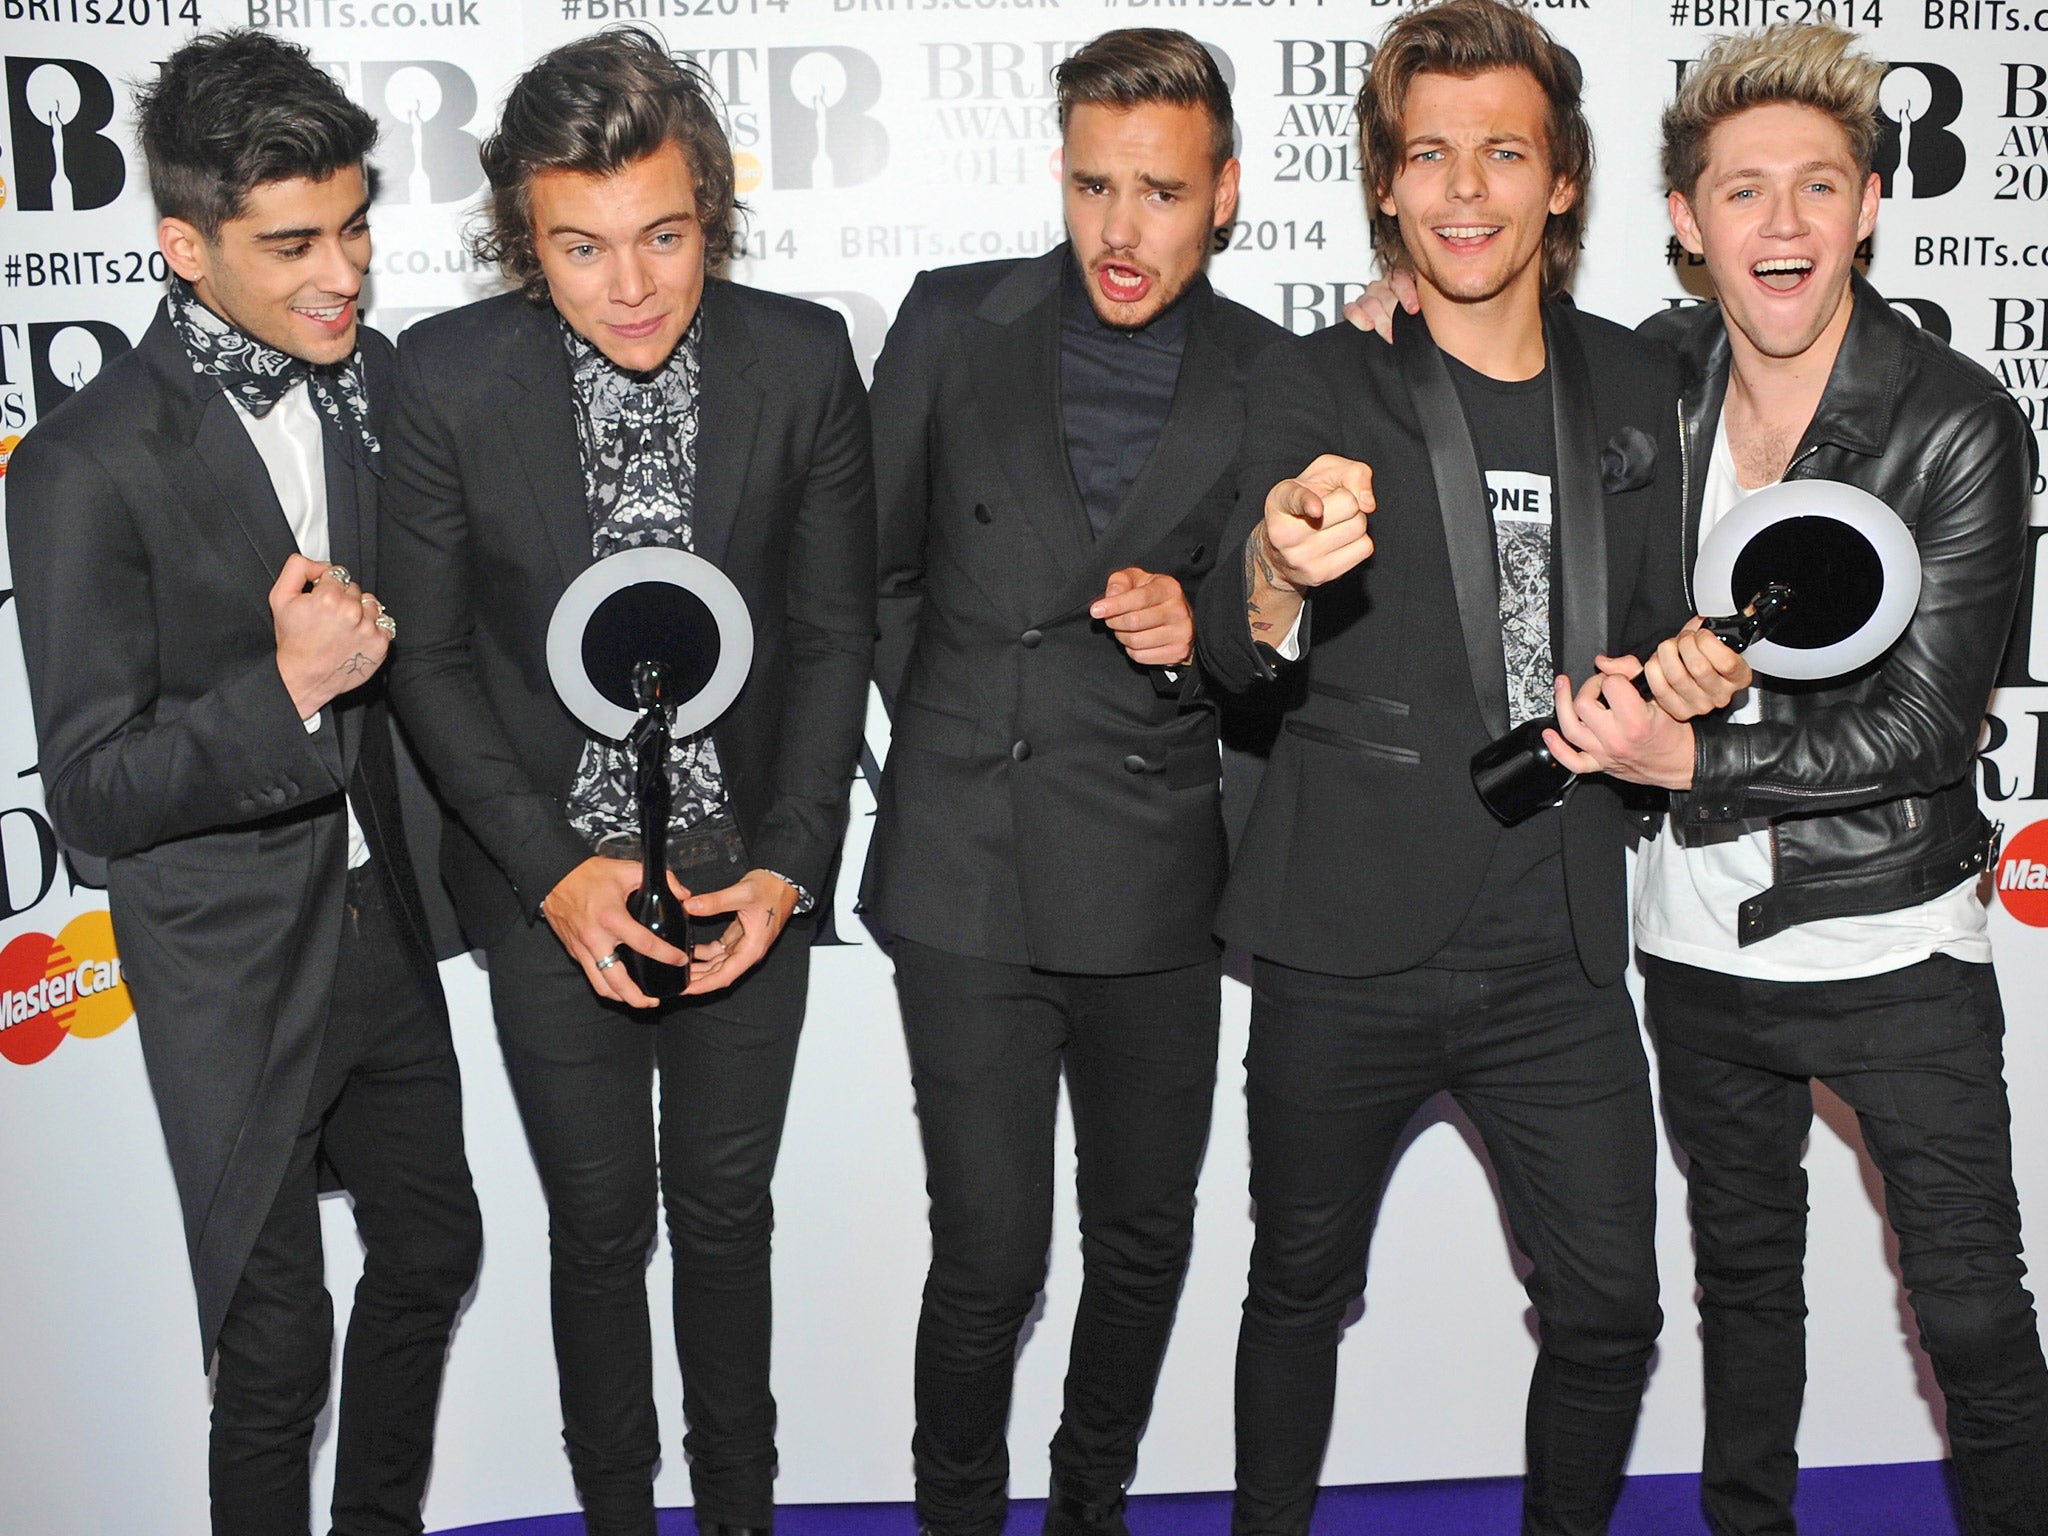 One Direction enjoyed success at last month's Brit Awards